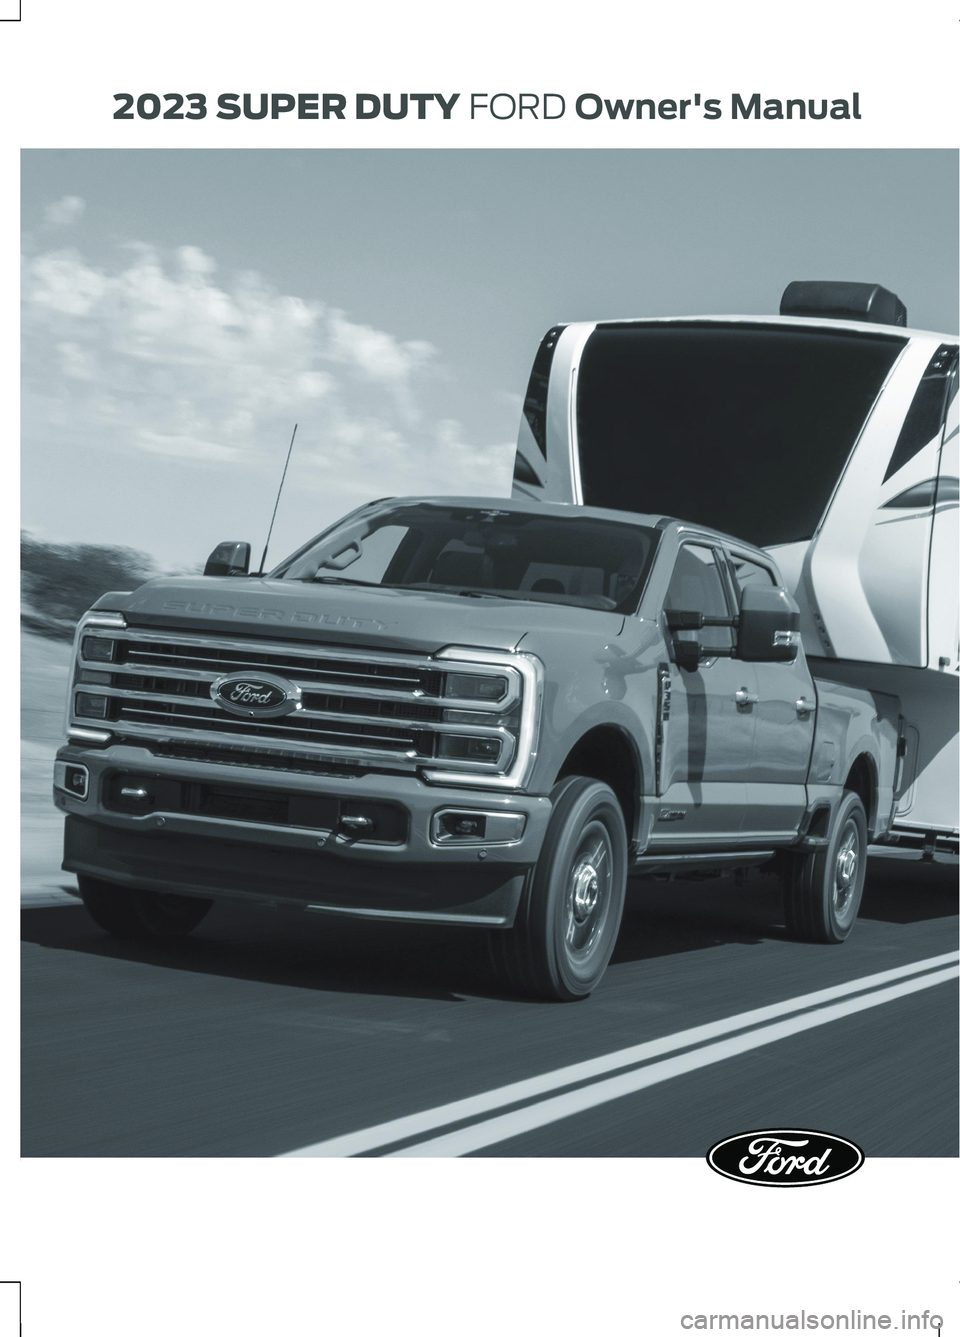 FORD SUPER DUTY 2023  Owners Manual  2023 SUPER DUTY FORD Owner'sManual 